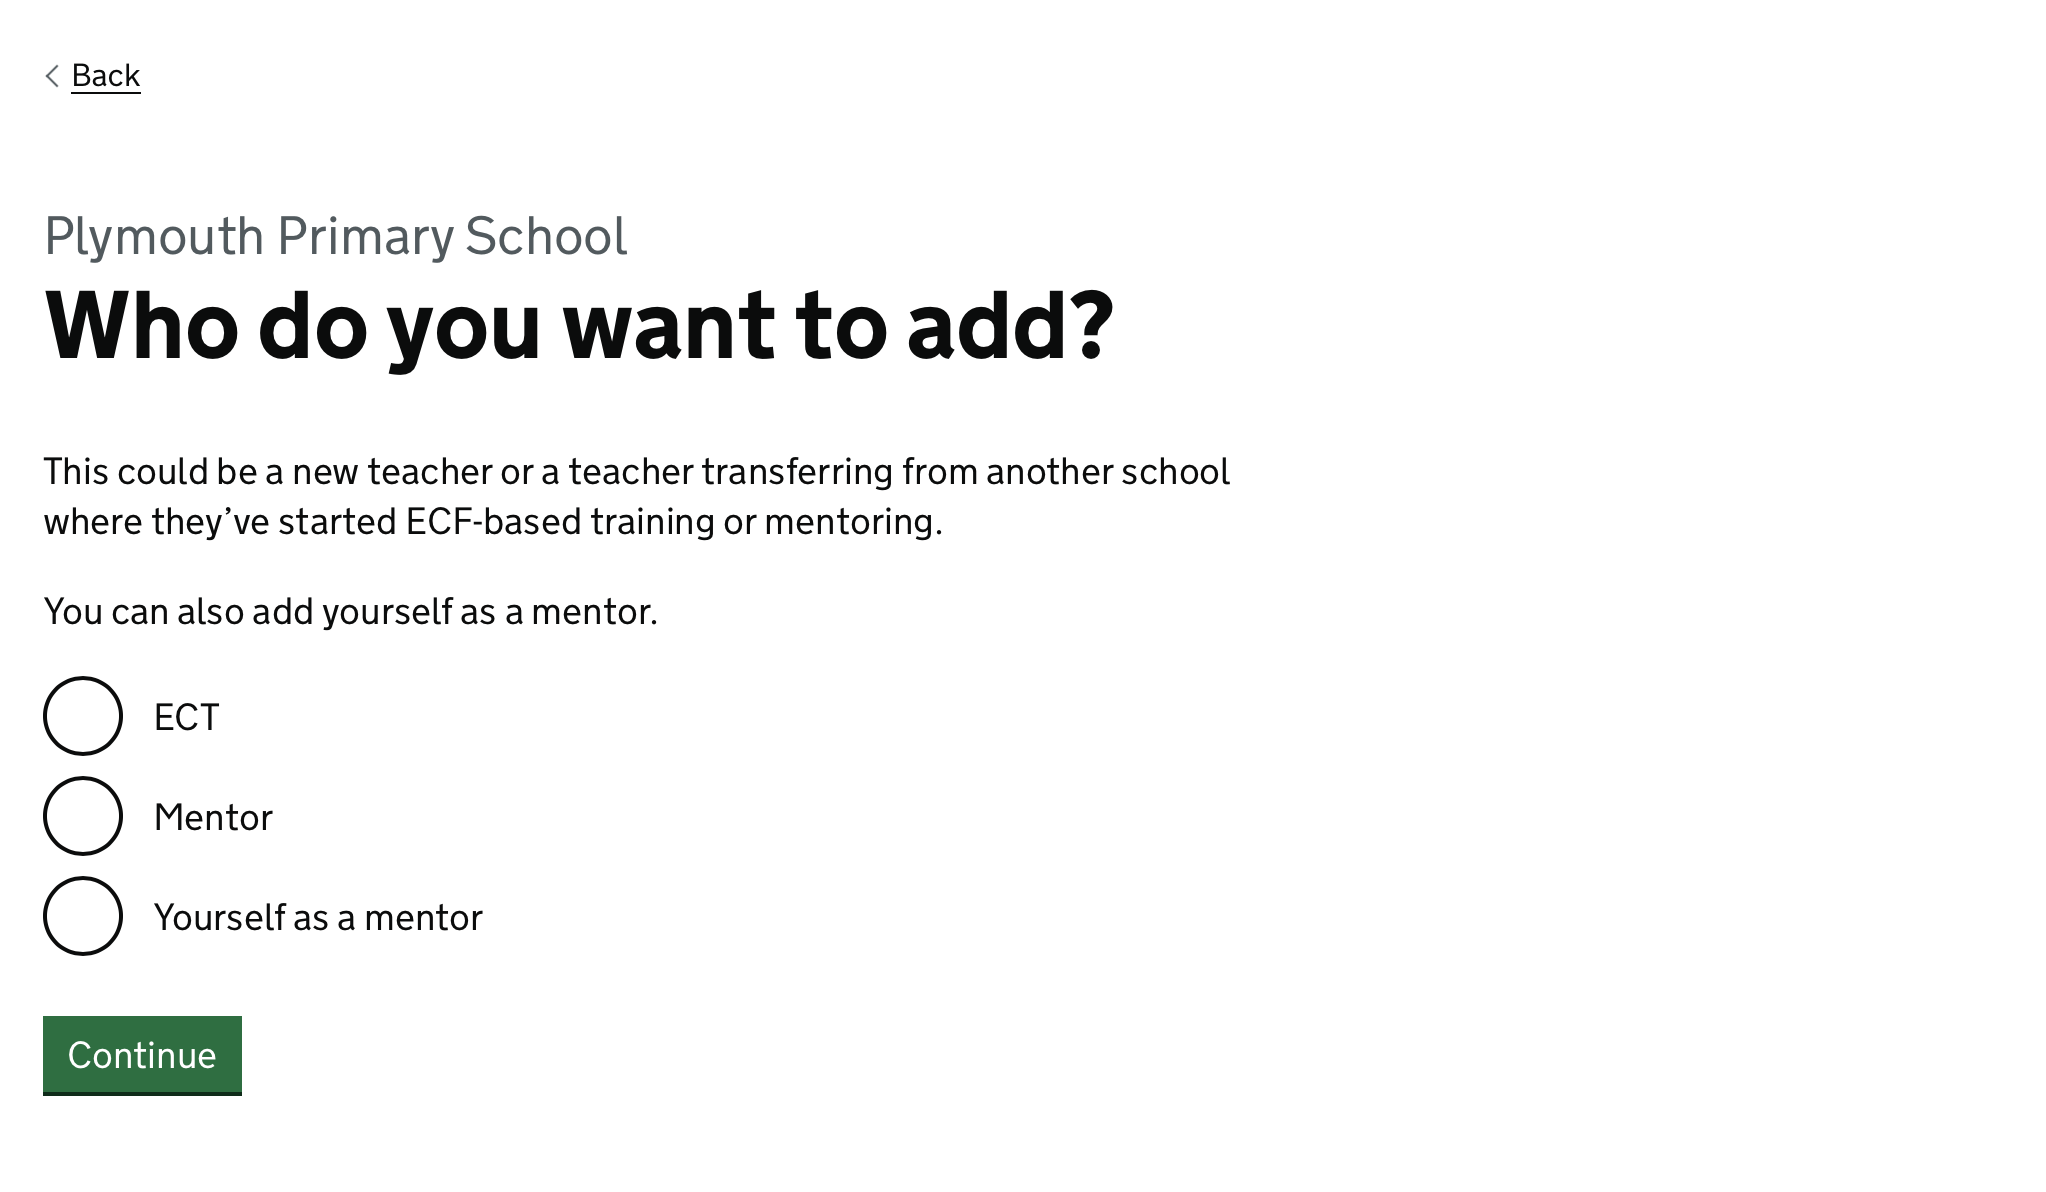 Screenshot with the title “Who do you want to add?” with radio button options for 'ECT', 'Mentor' and 'Yourself as mentor'